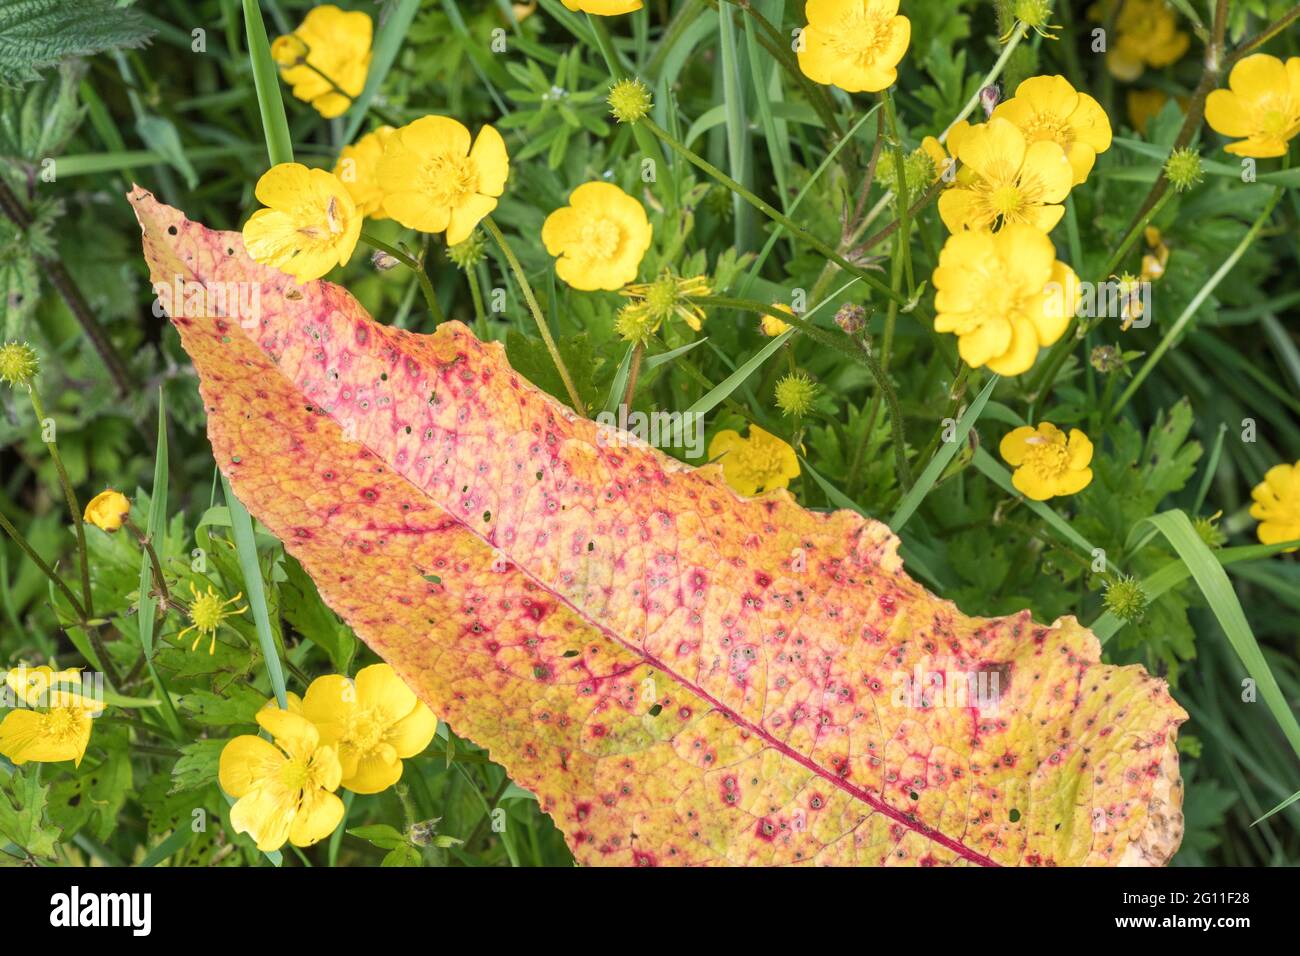 Diseased leaf of Broad-Leaved Dock / Rumex obtusifolius - possibly from Ramularia rubella - among yellow Buttercup flowers. For plant diseases UK. Stock Photo